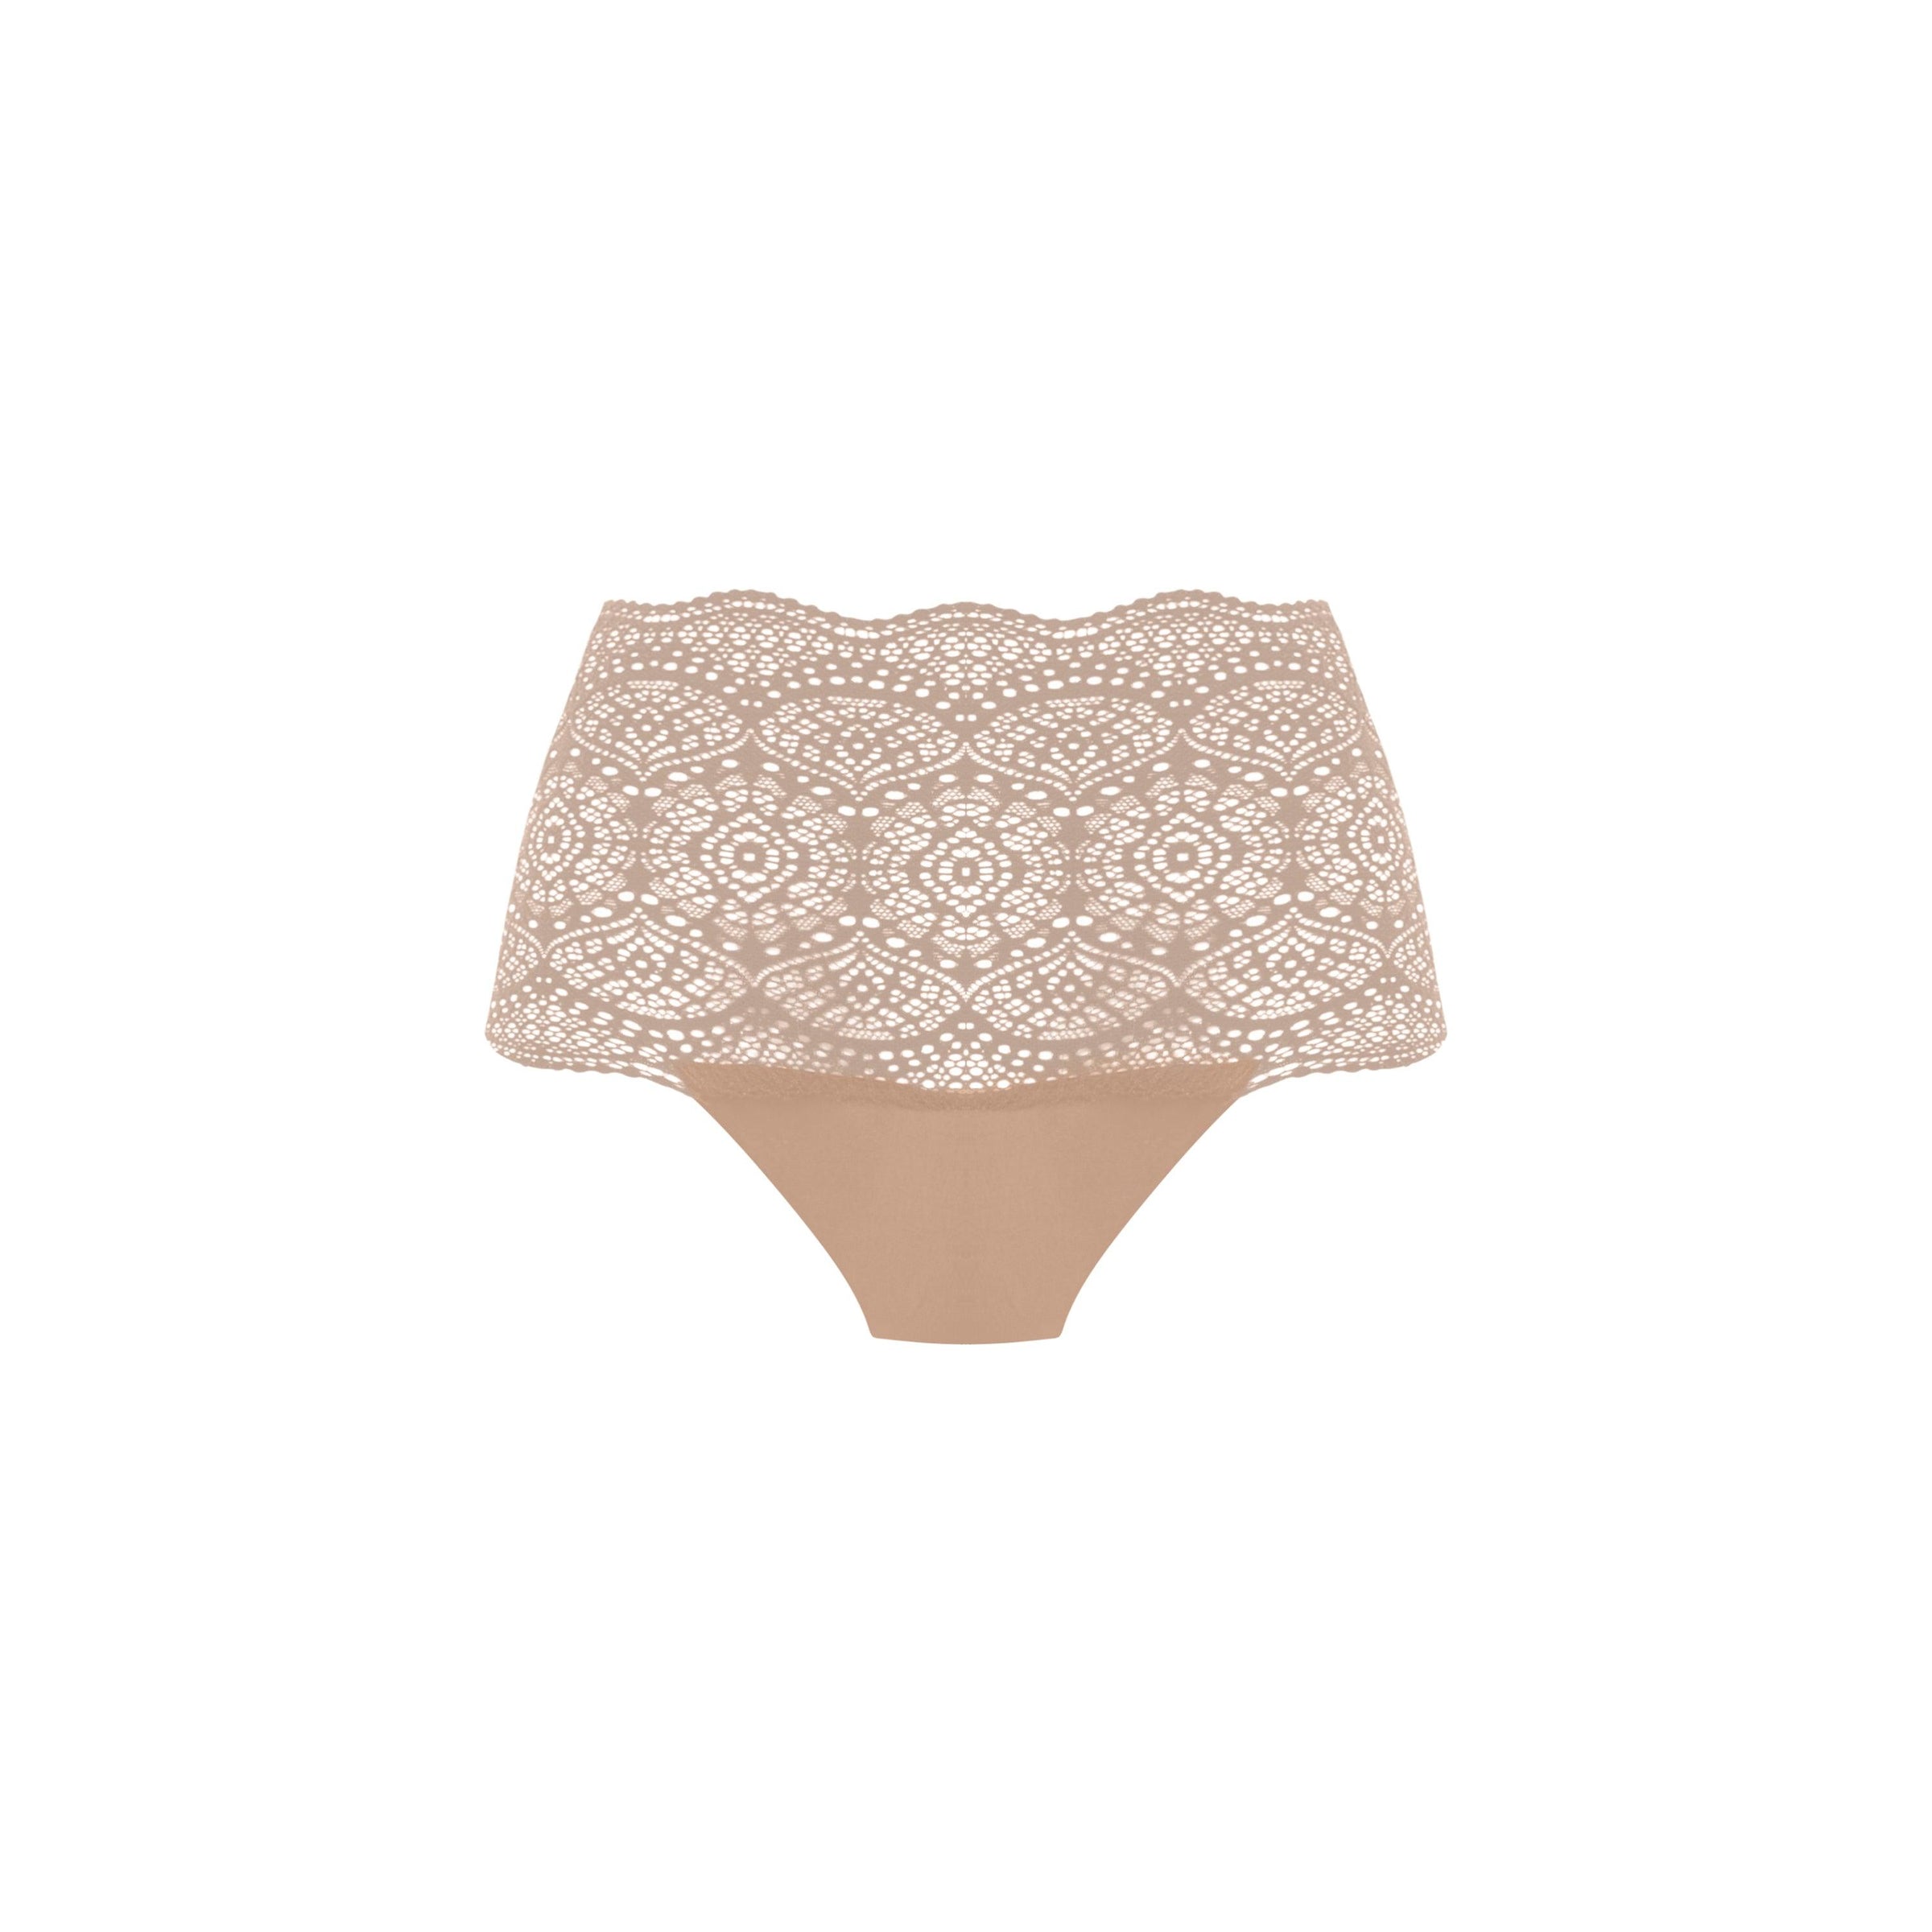 Fantasie "Lace Ease" Natural Beige Invisible Stretch Full Brief